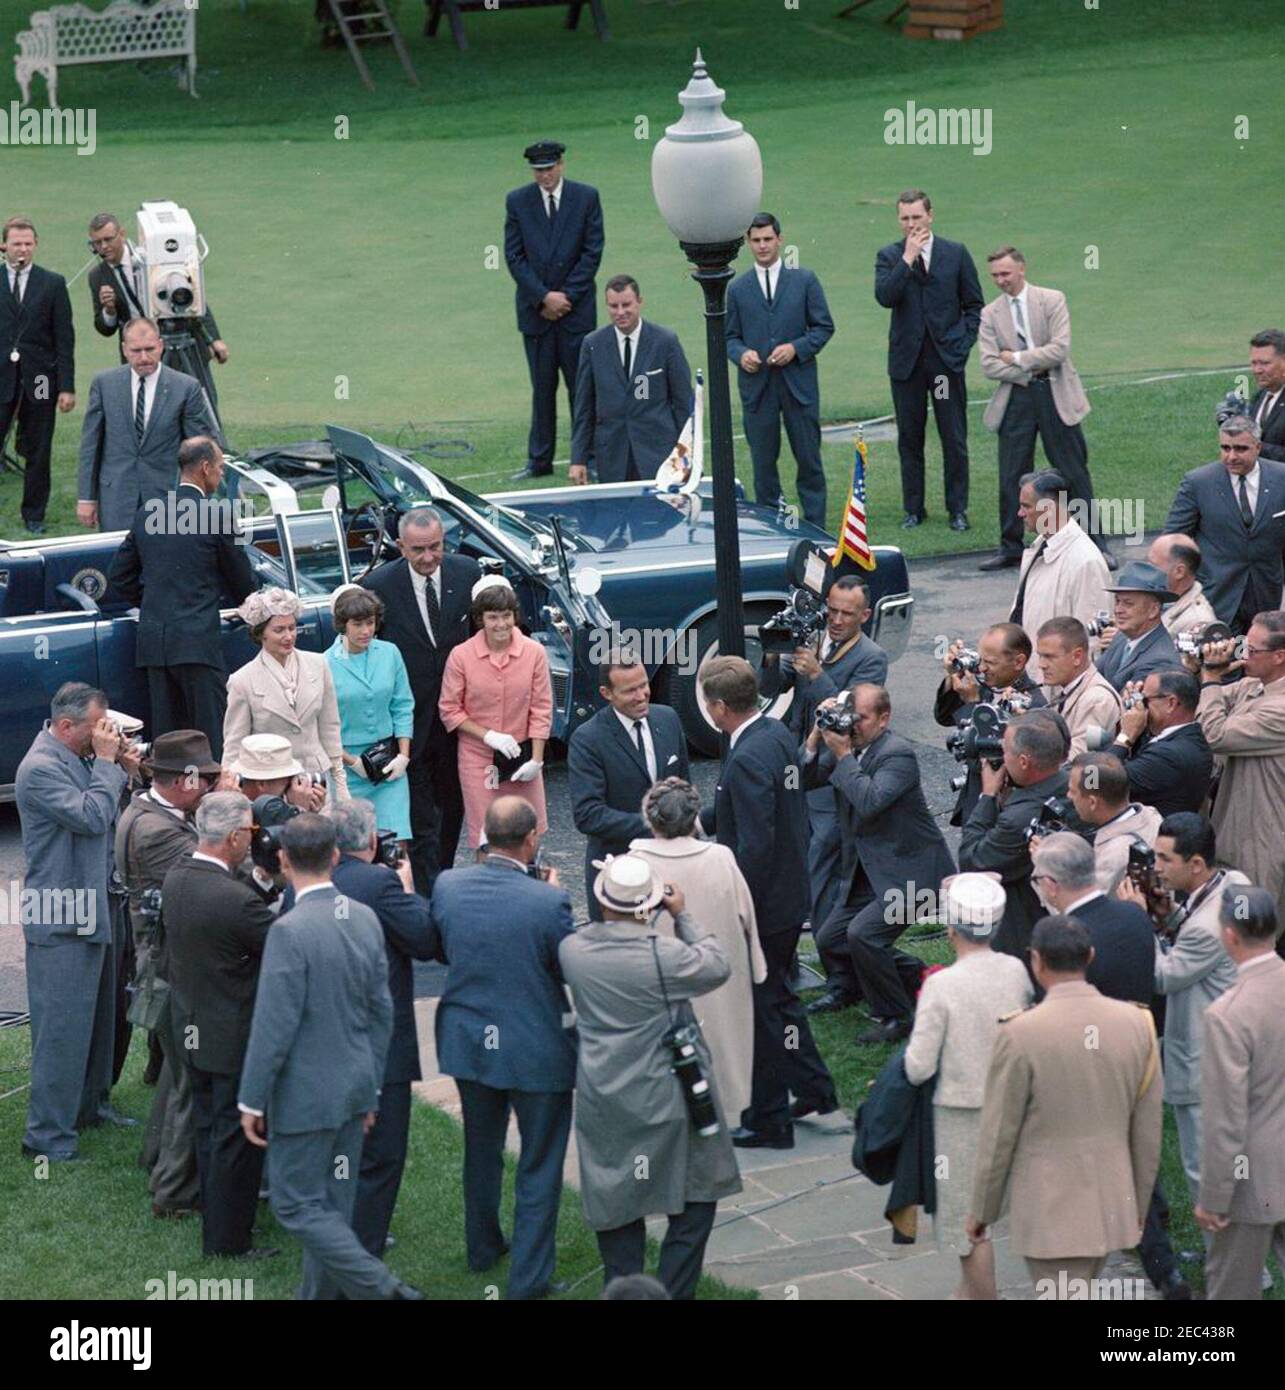 Presentation of the National Aeronautics and Space Administration (NASA) Distinguished Service Medal (DSM) to Astronaut Major L. Gordon Cooper, 12:15PM. President John F. Kennedy (center) greets astronaut Major L. Gordon Cooper and his family on the walkway outside the Oval Office upon their arrival at the White House for Major Cooperu2019s National Aeronautics and Space Administration (NASA) Distinguished Service Medal (DSM) presentation ceremony. Standing behind Major Cooper are his wife, Trudy, and his daughters, Camala and Janita. Hattie Cooper, mother of Major Cooper, stands next to Pres Stock Photo